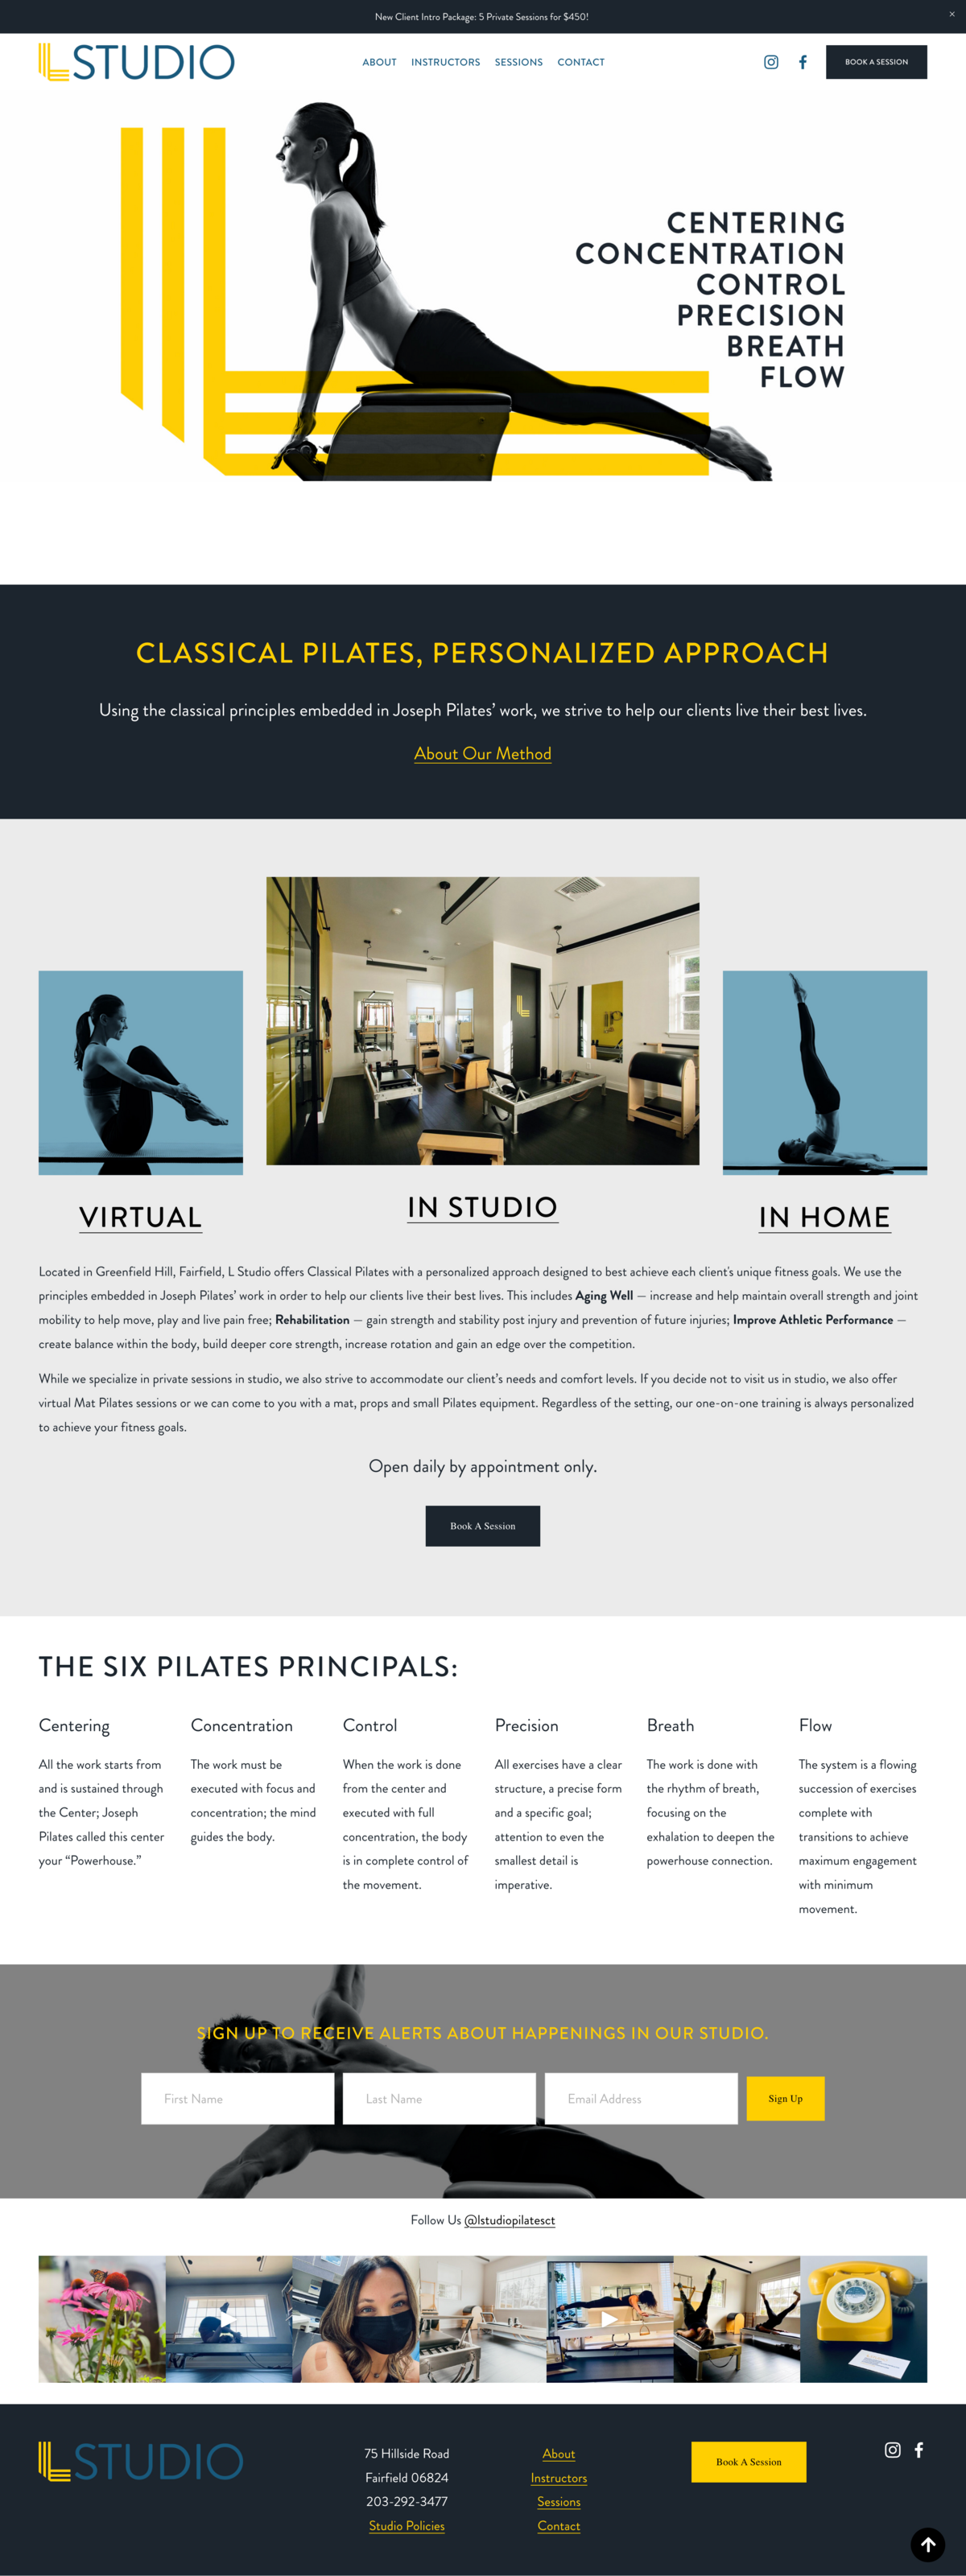 Homepage design of L Studio Pilates featuring navy and yellow accents and black and white pilates imagery